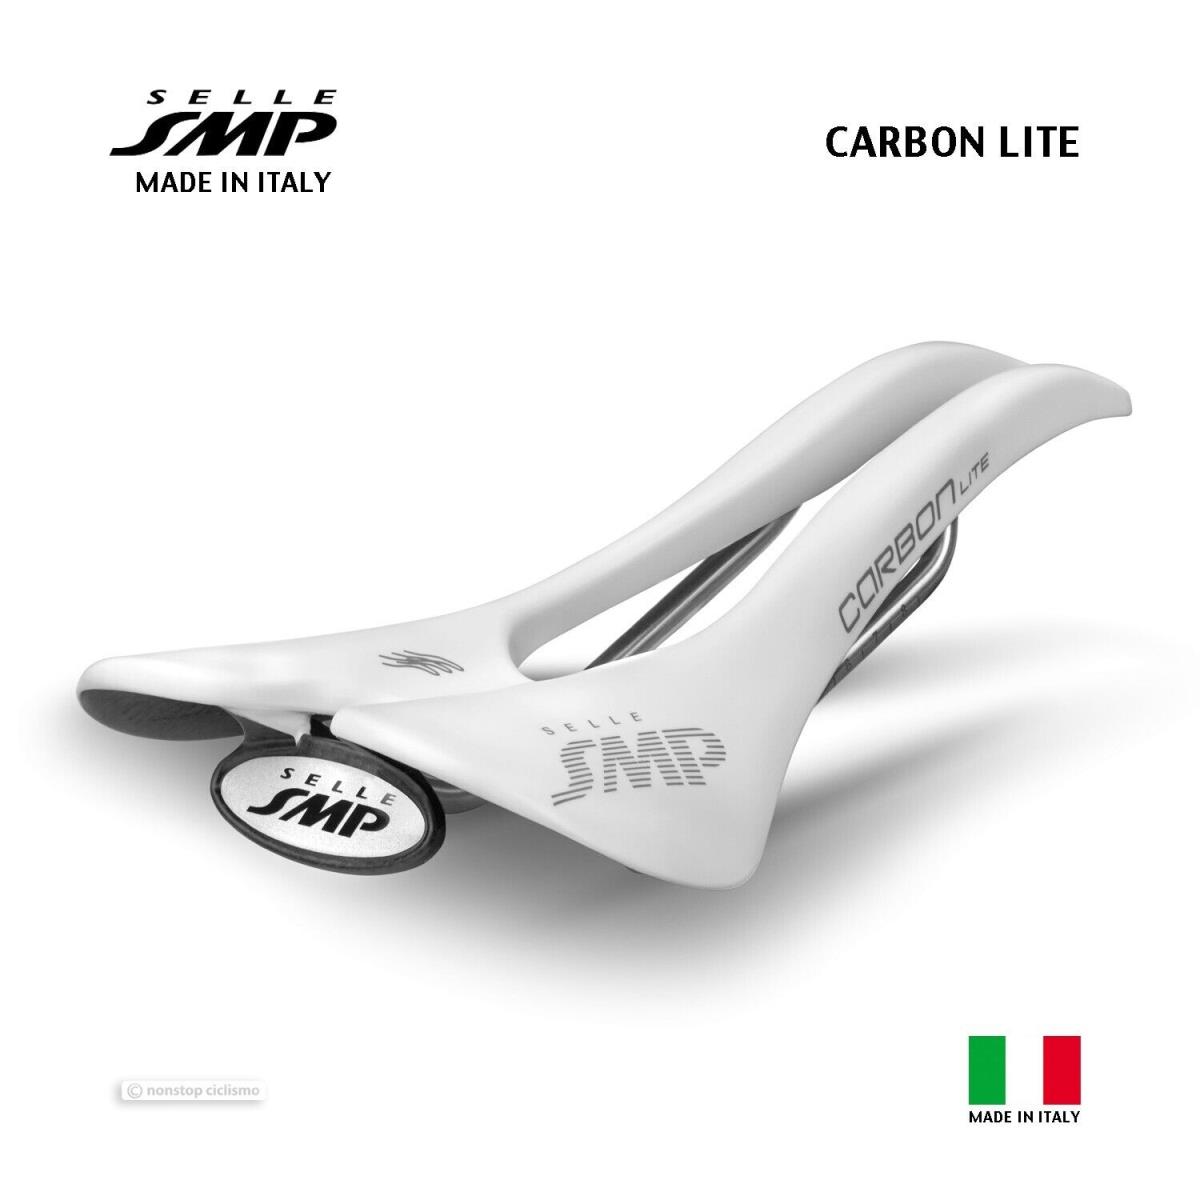 Selle Smp Carbon Lite Saddle : White- Made IN Italy - White